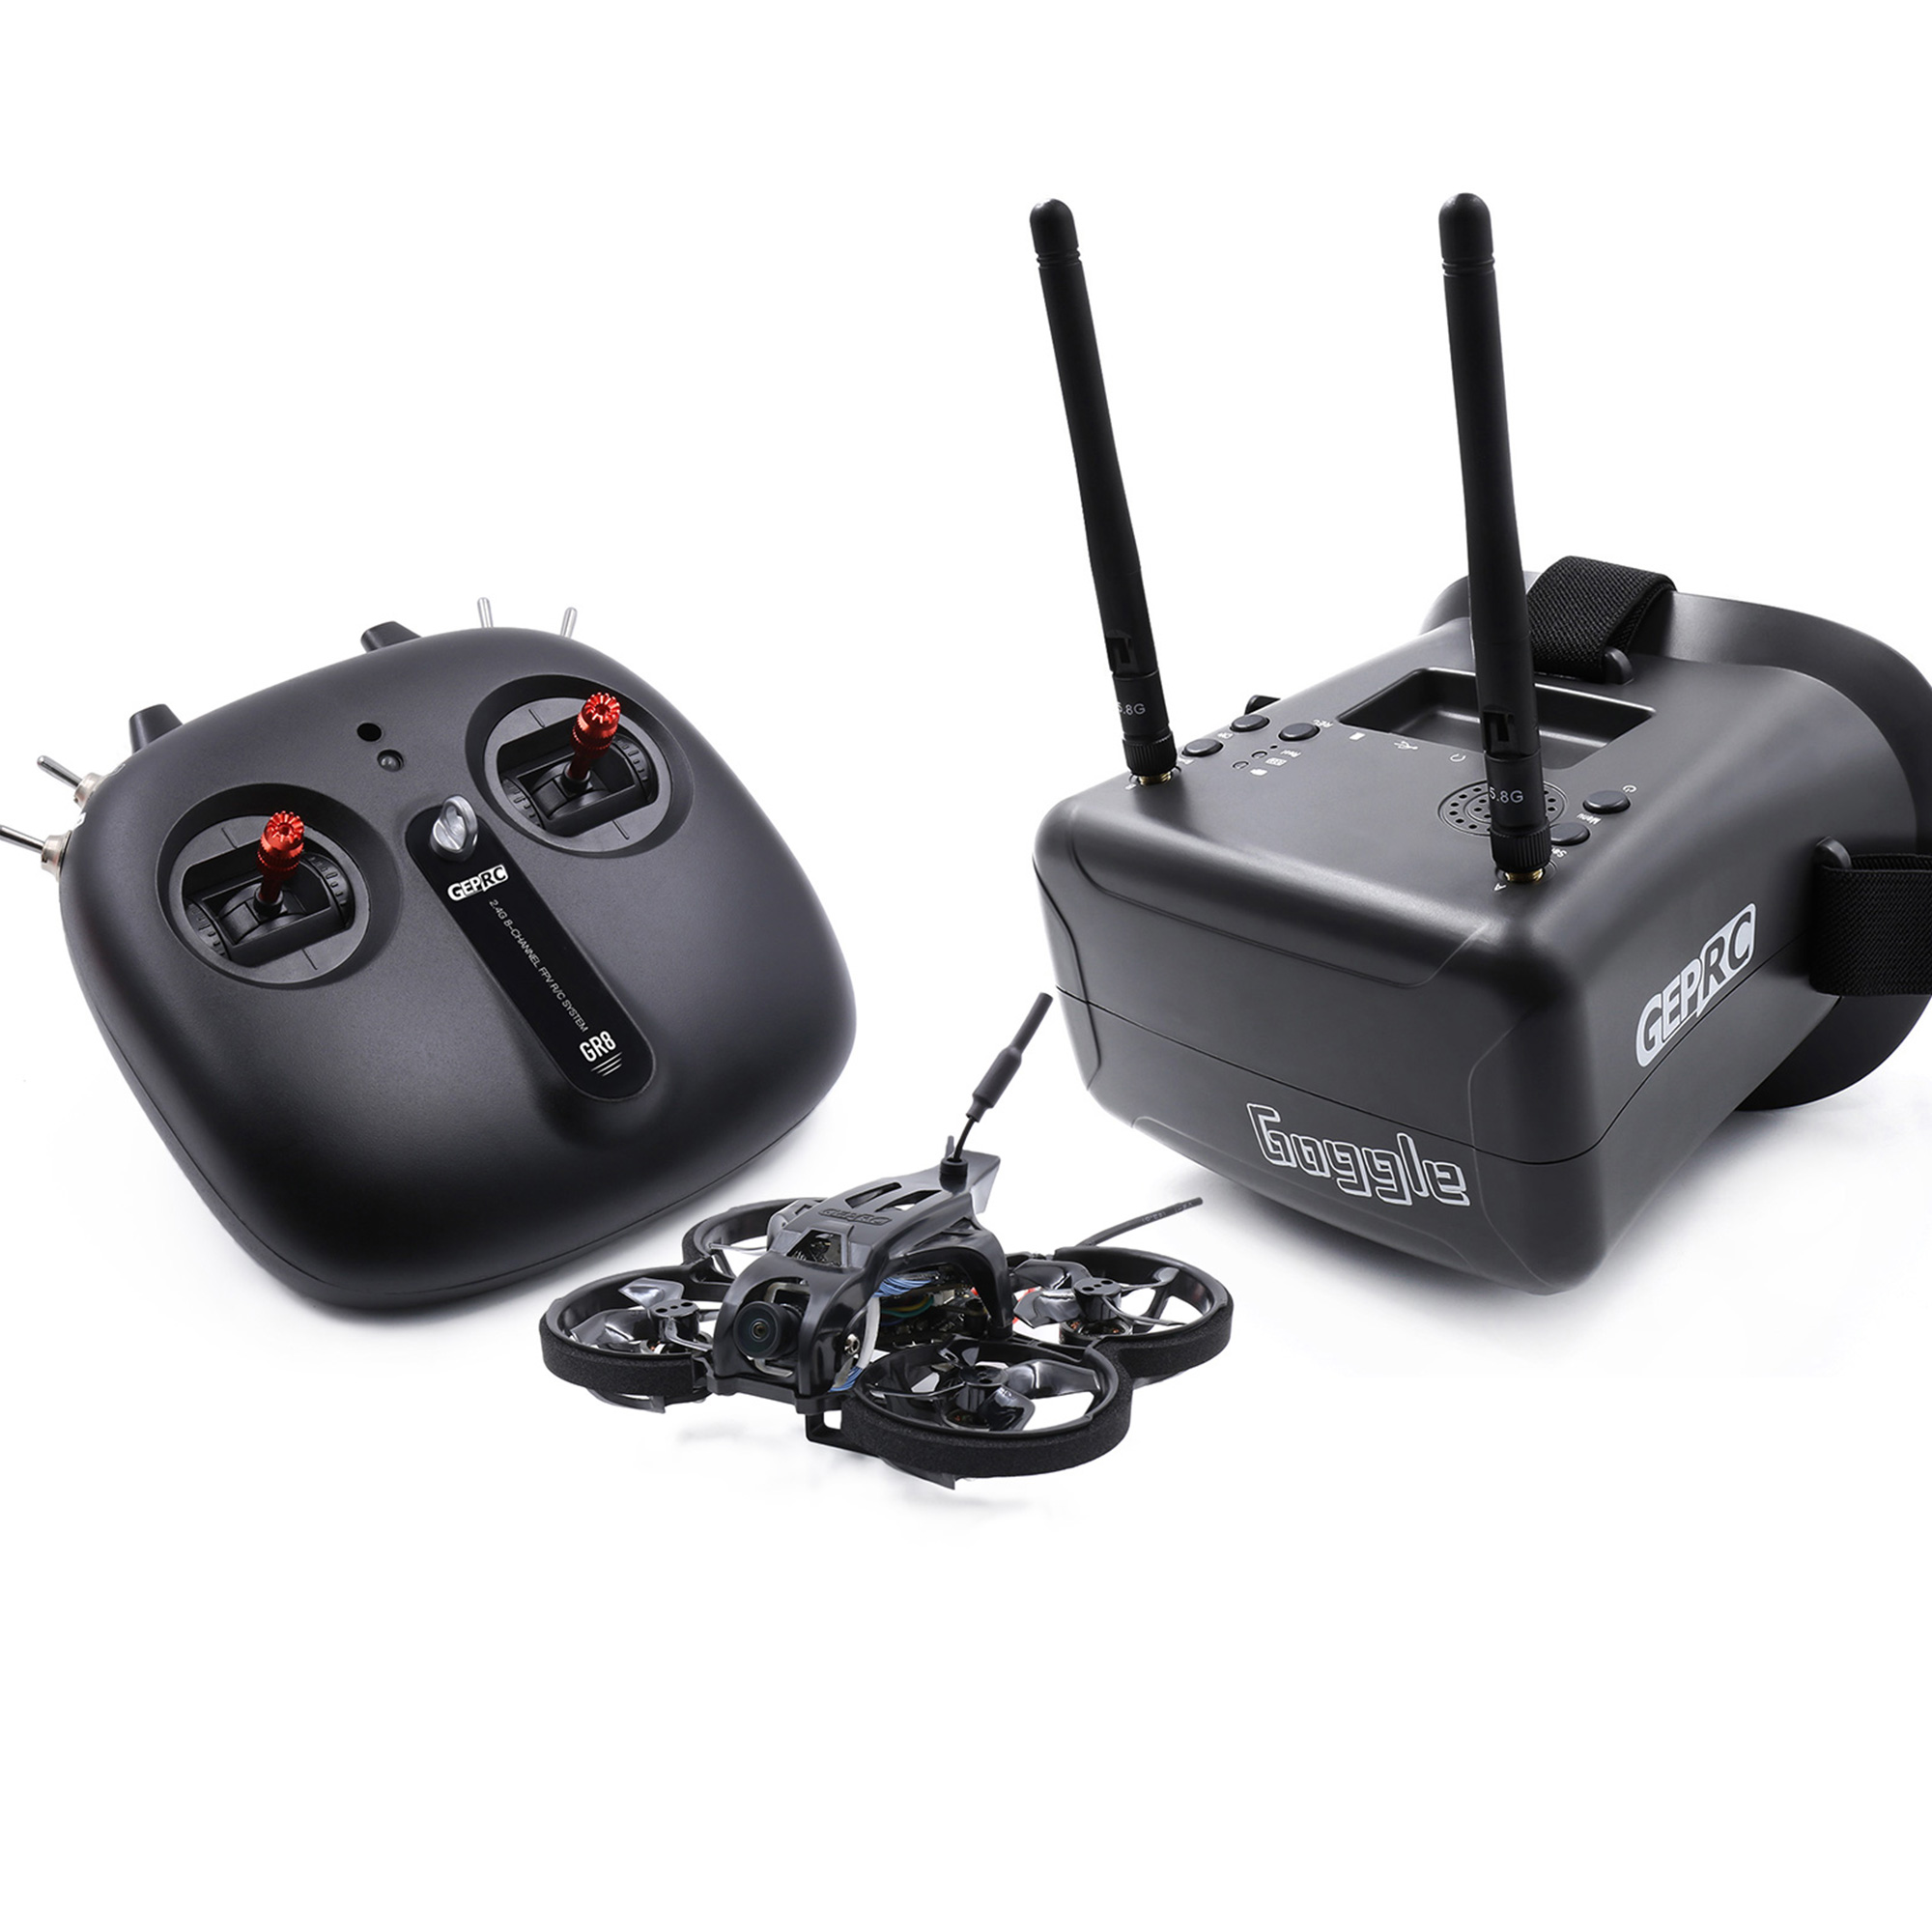 GEPRC TinyGO 1.6inch 2S 4K Caddx Loris FPV Indoor Whoop+GR8 Remote Controller+RG1 Goggles RTF Ready To Fly FPV Racing RC Drone 1